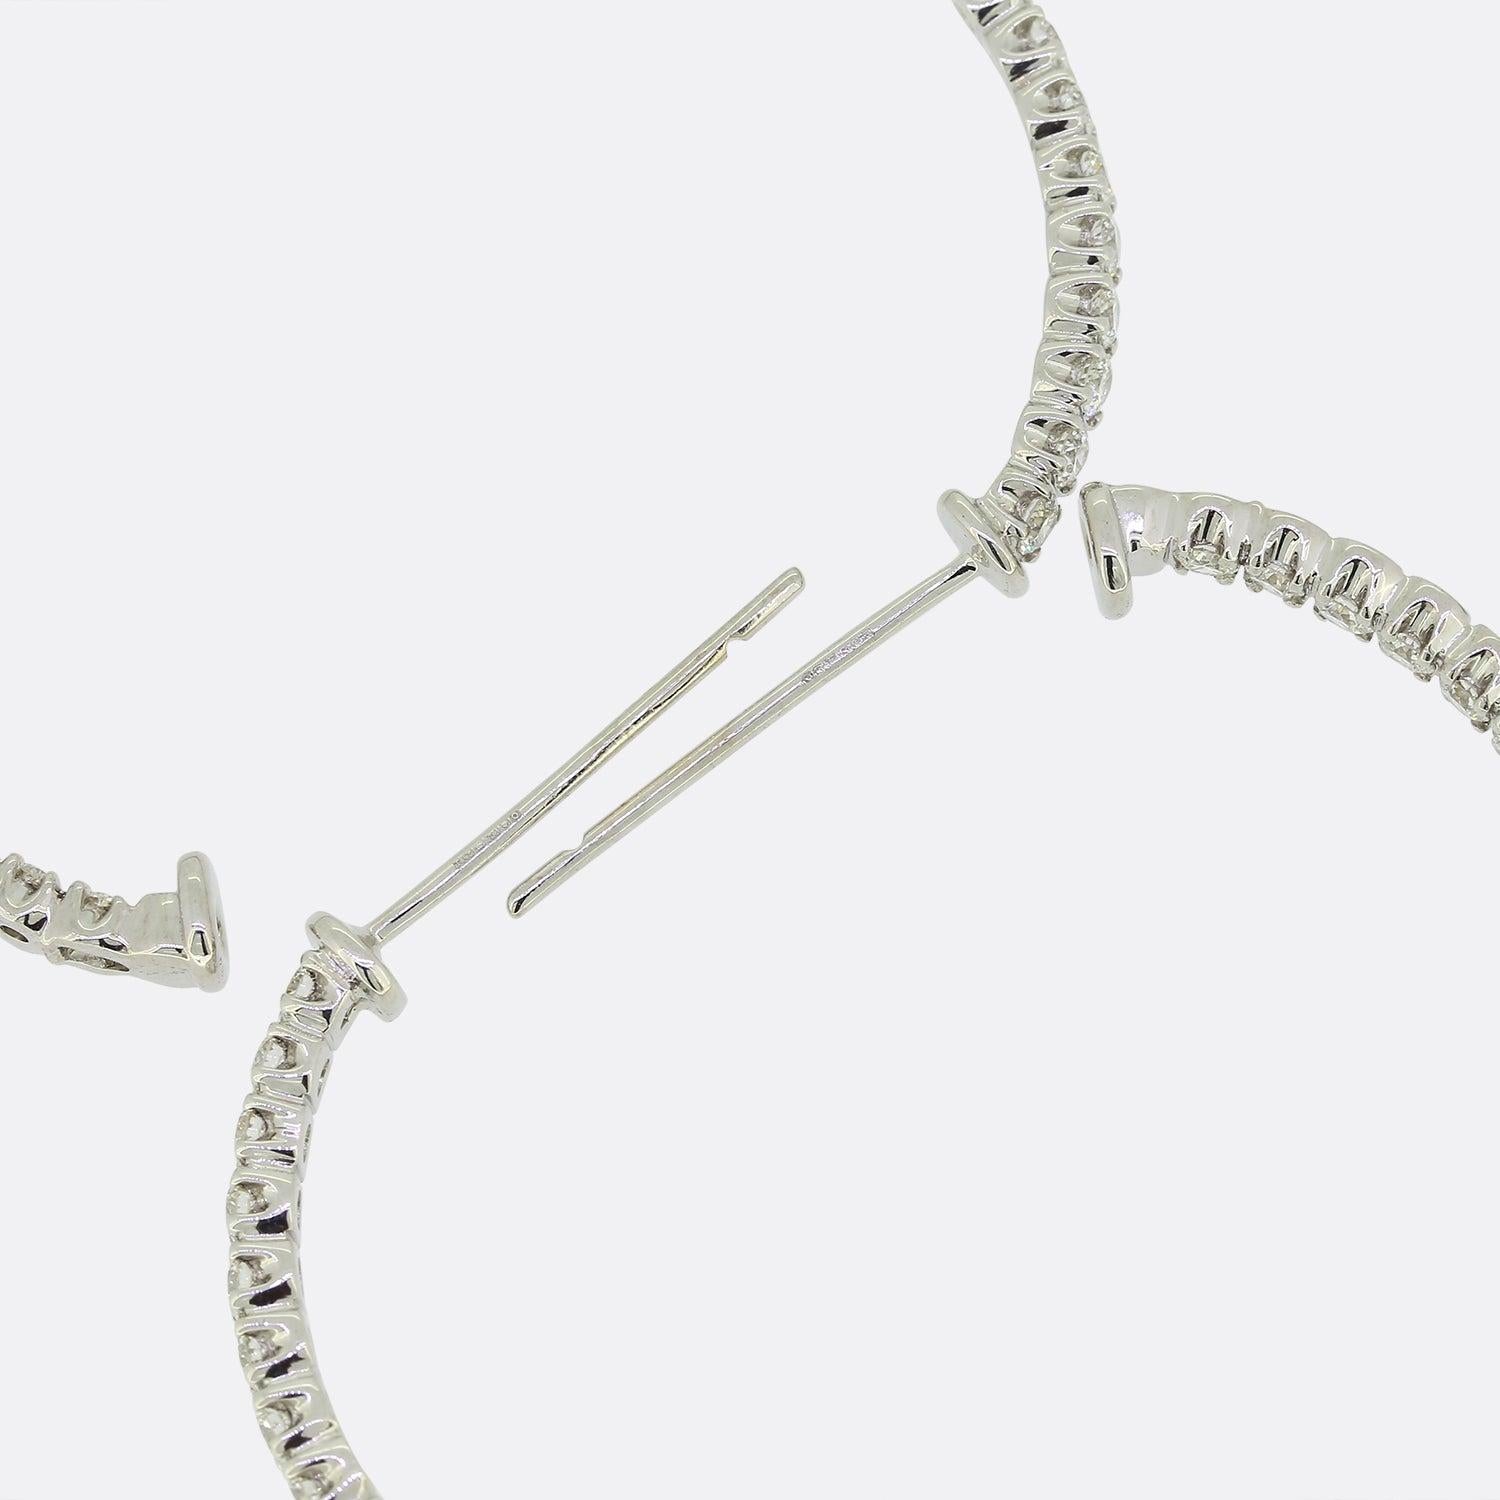 This is a pair of 18ct white gold diamond hoop earrings from the luxury jewellery designer, Tiffany & Co. These earrings have been cleverly made in two halves with a hinge at the base, joining the two together. They are set with round brilliant cut